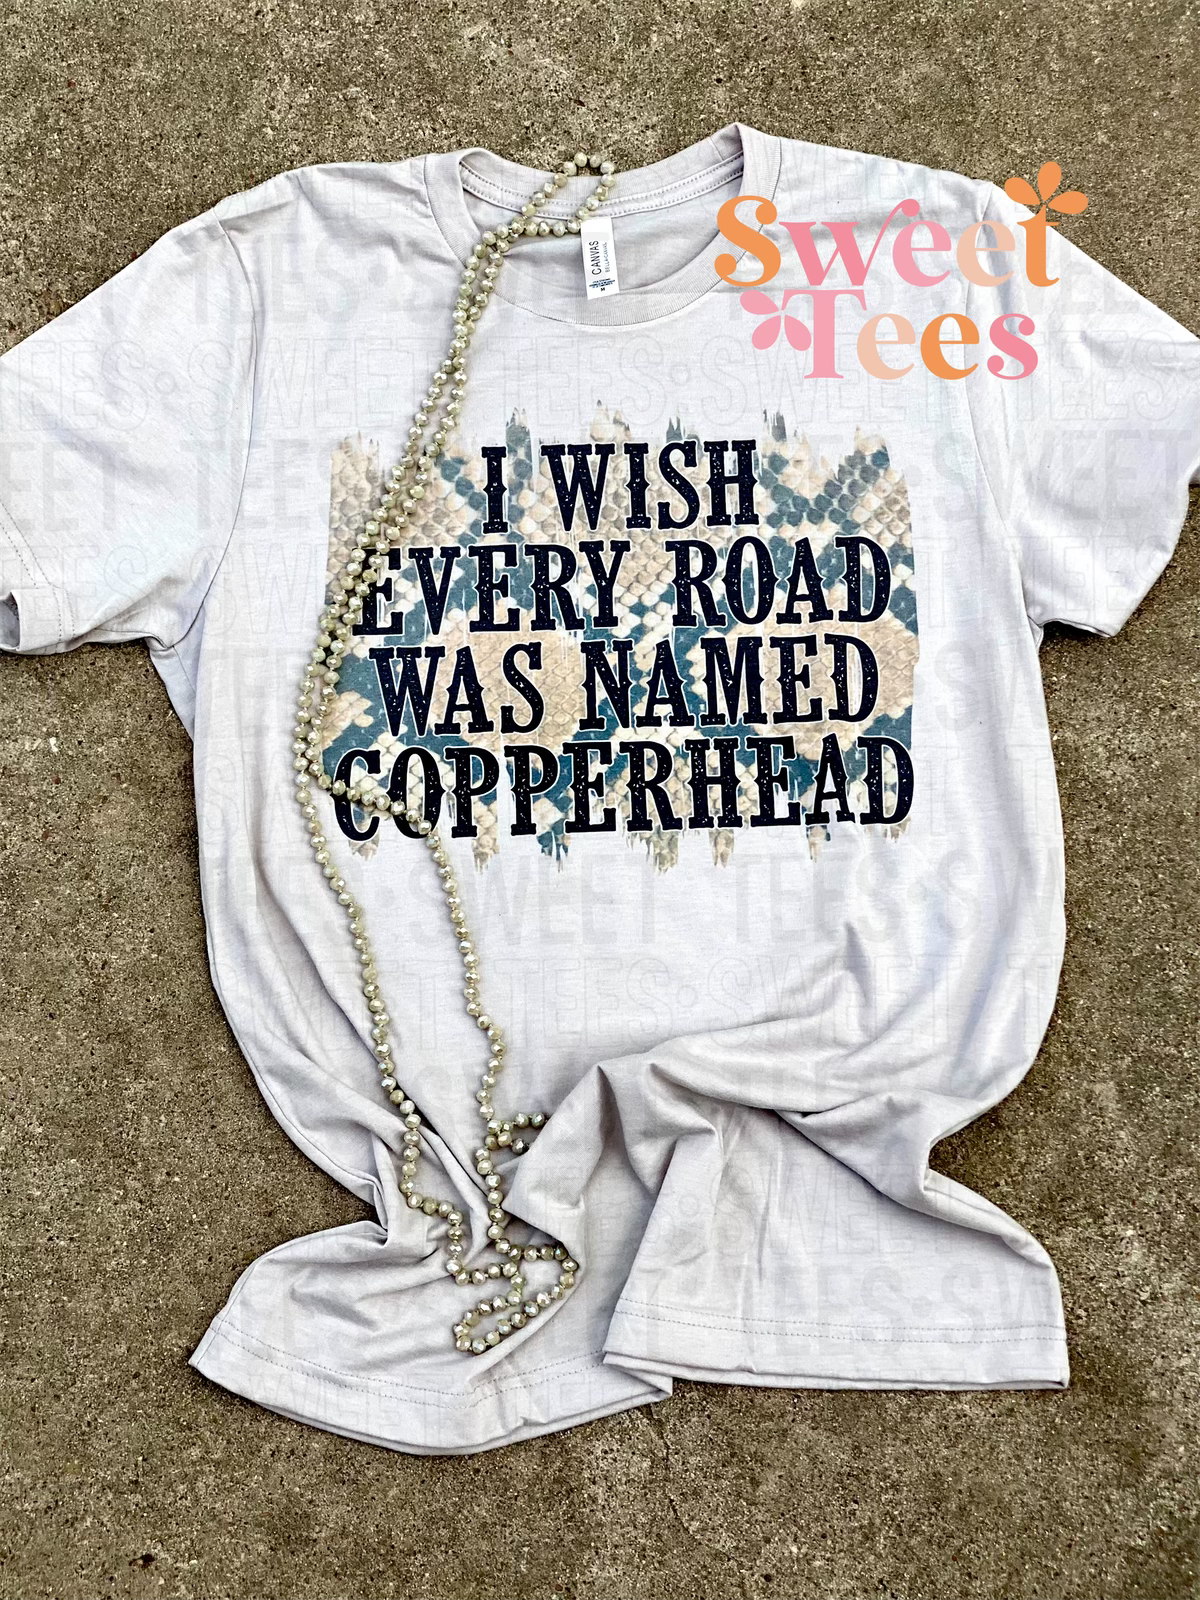 Wish Every Road Was Named Copperhead tee